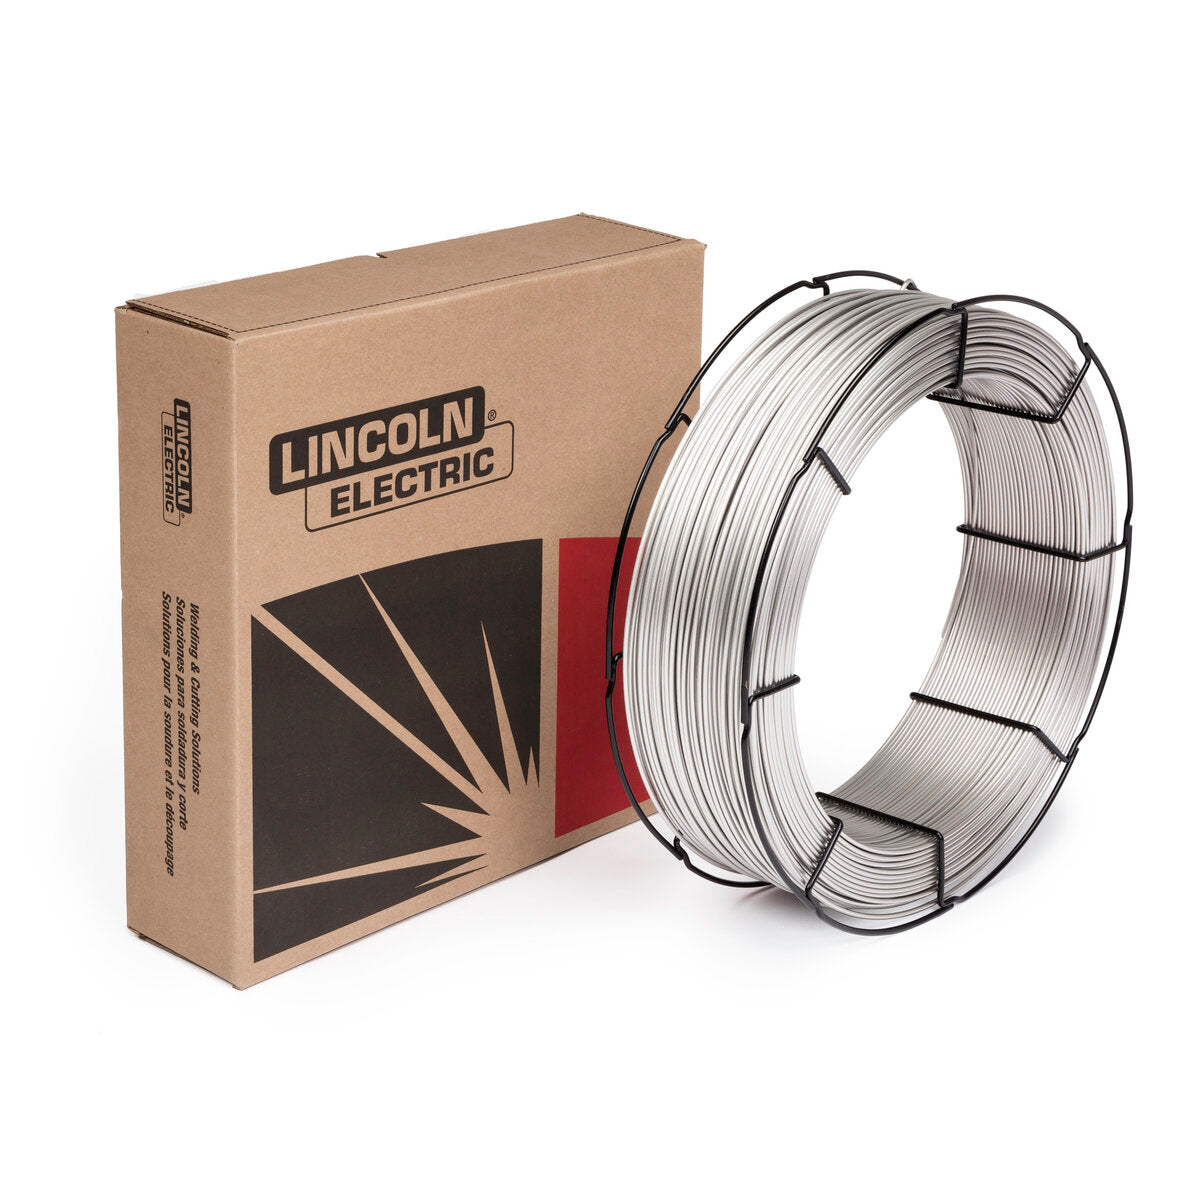 Lincoln Electric - Techalloy® 606 Submerged Arc (SAW) Wire, 3/32 in, 55 lb Coil - SA606093726